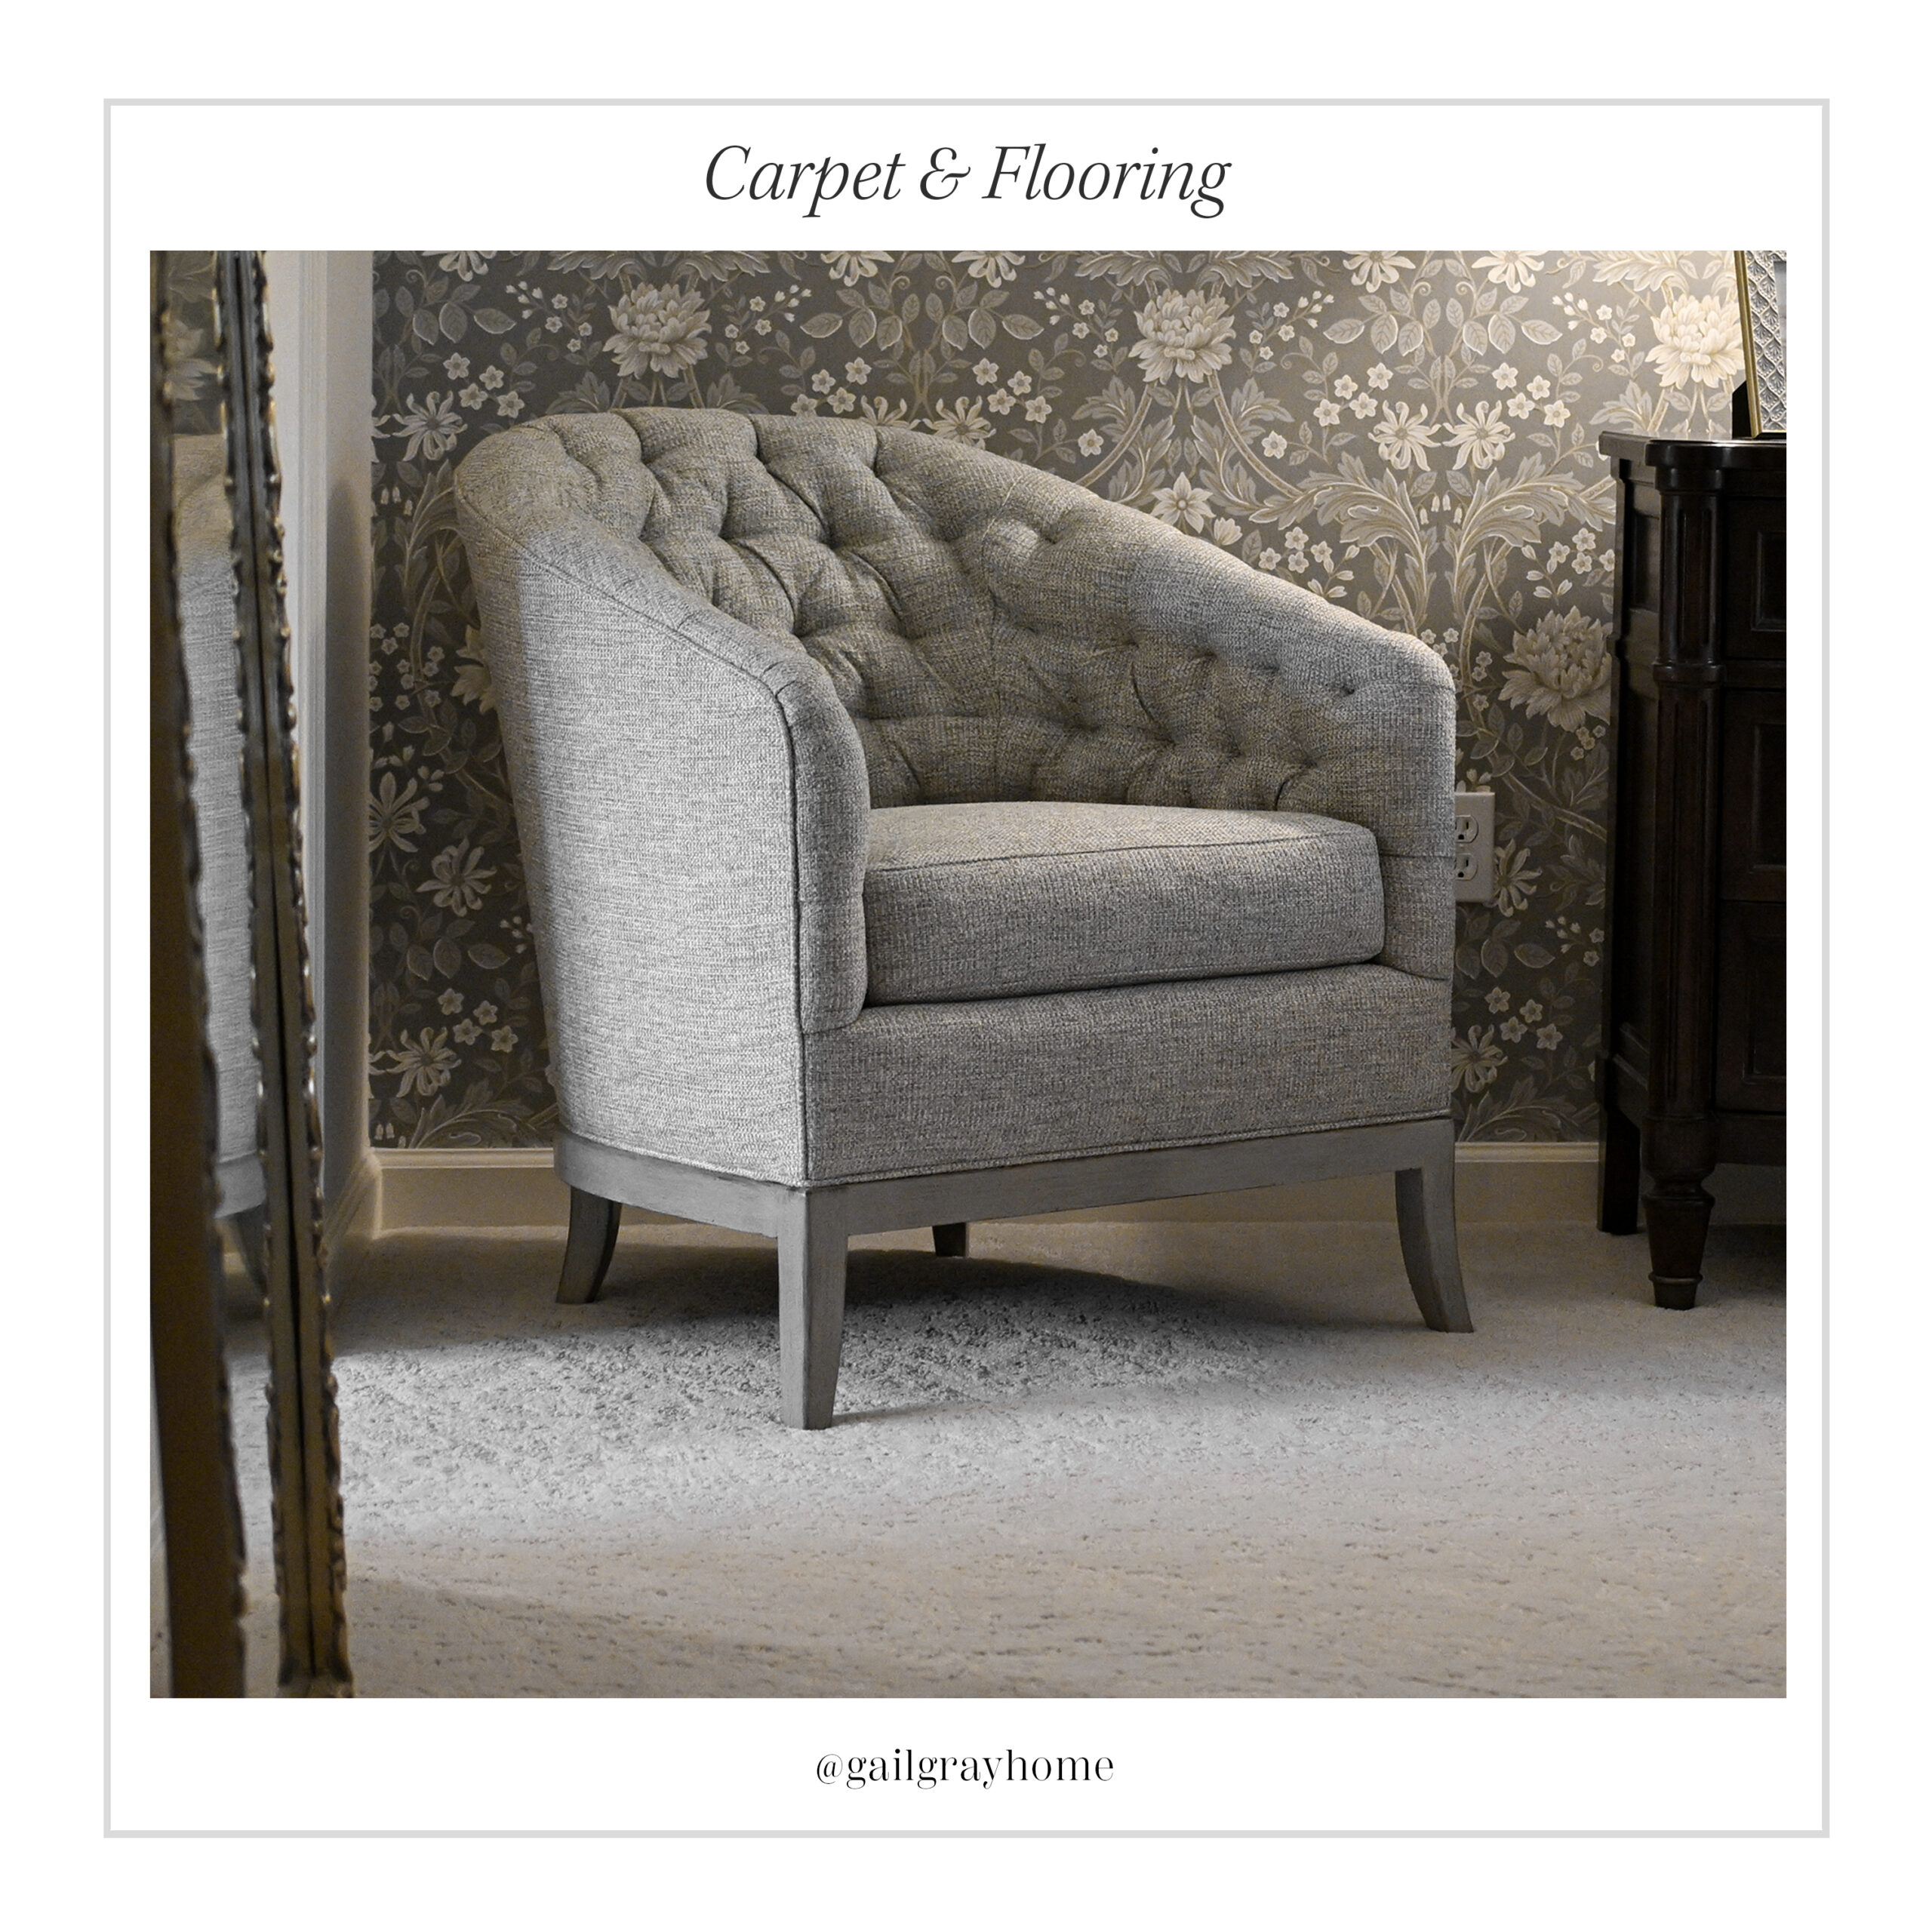 Carpet and Flooring Design Services at GailGray Home